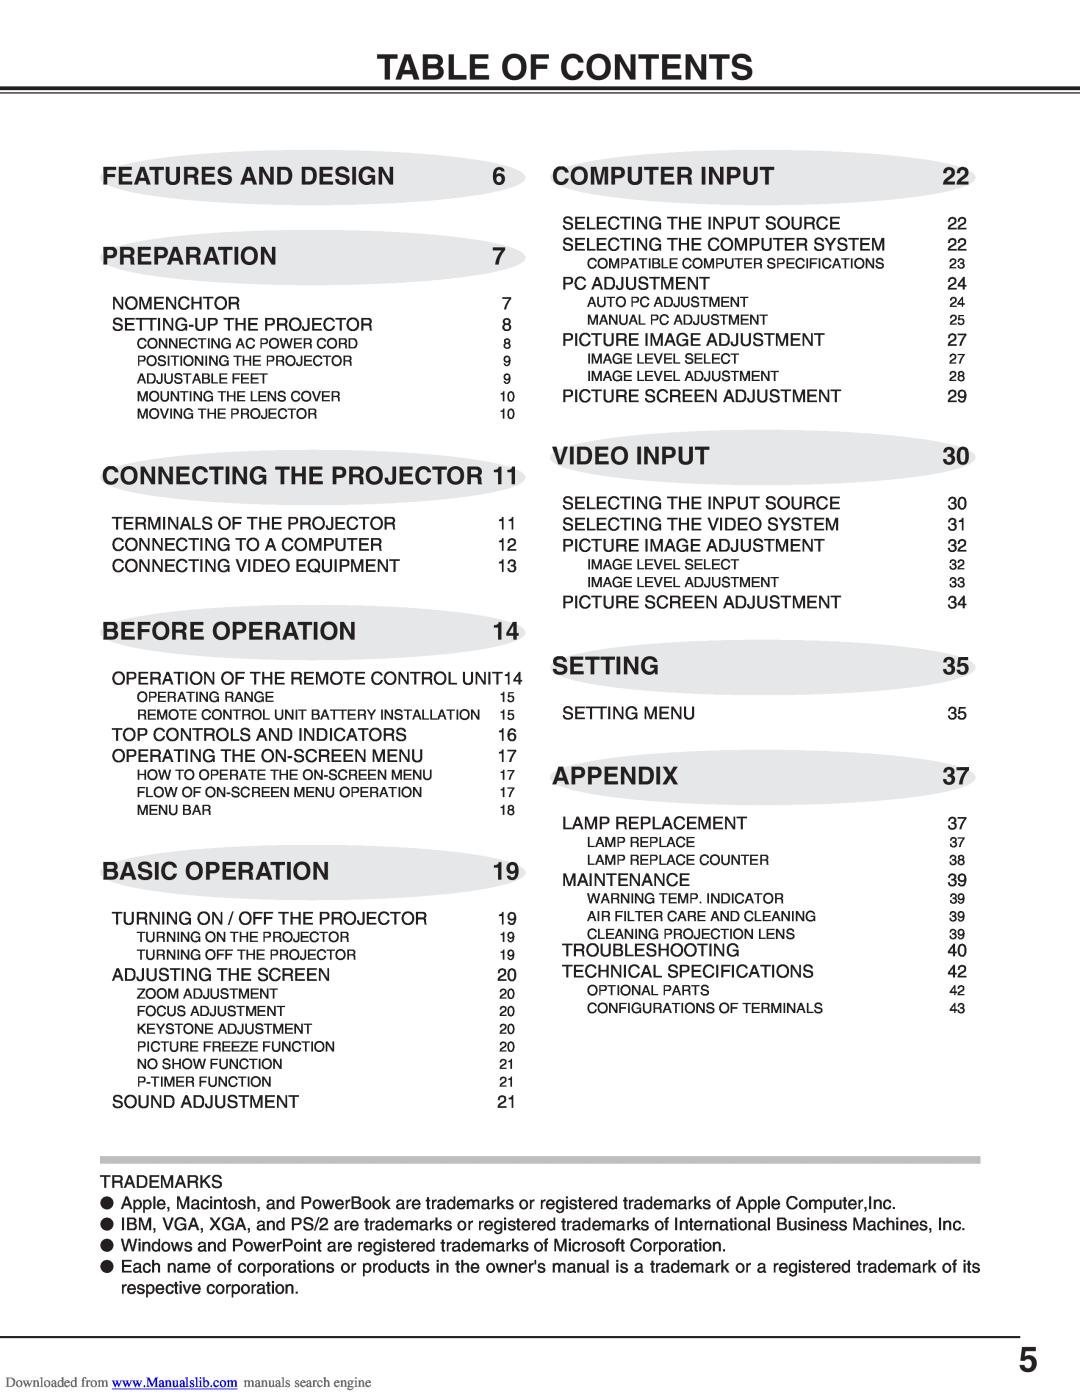 Canon LV-S2 Table Of Contents, Features And Design, Preparation, Connecting The Projector, Computer Input, Video Input 